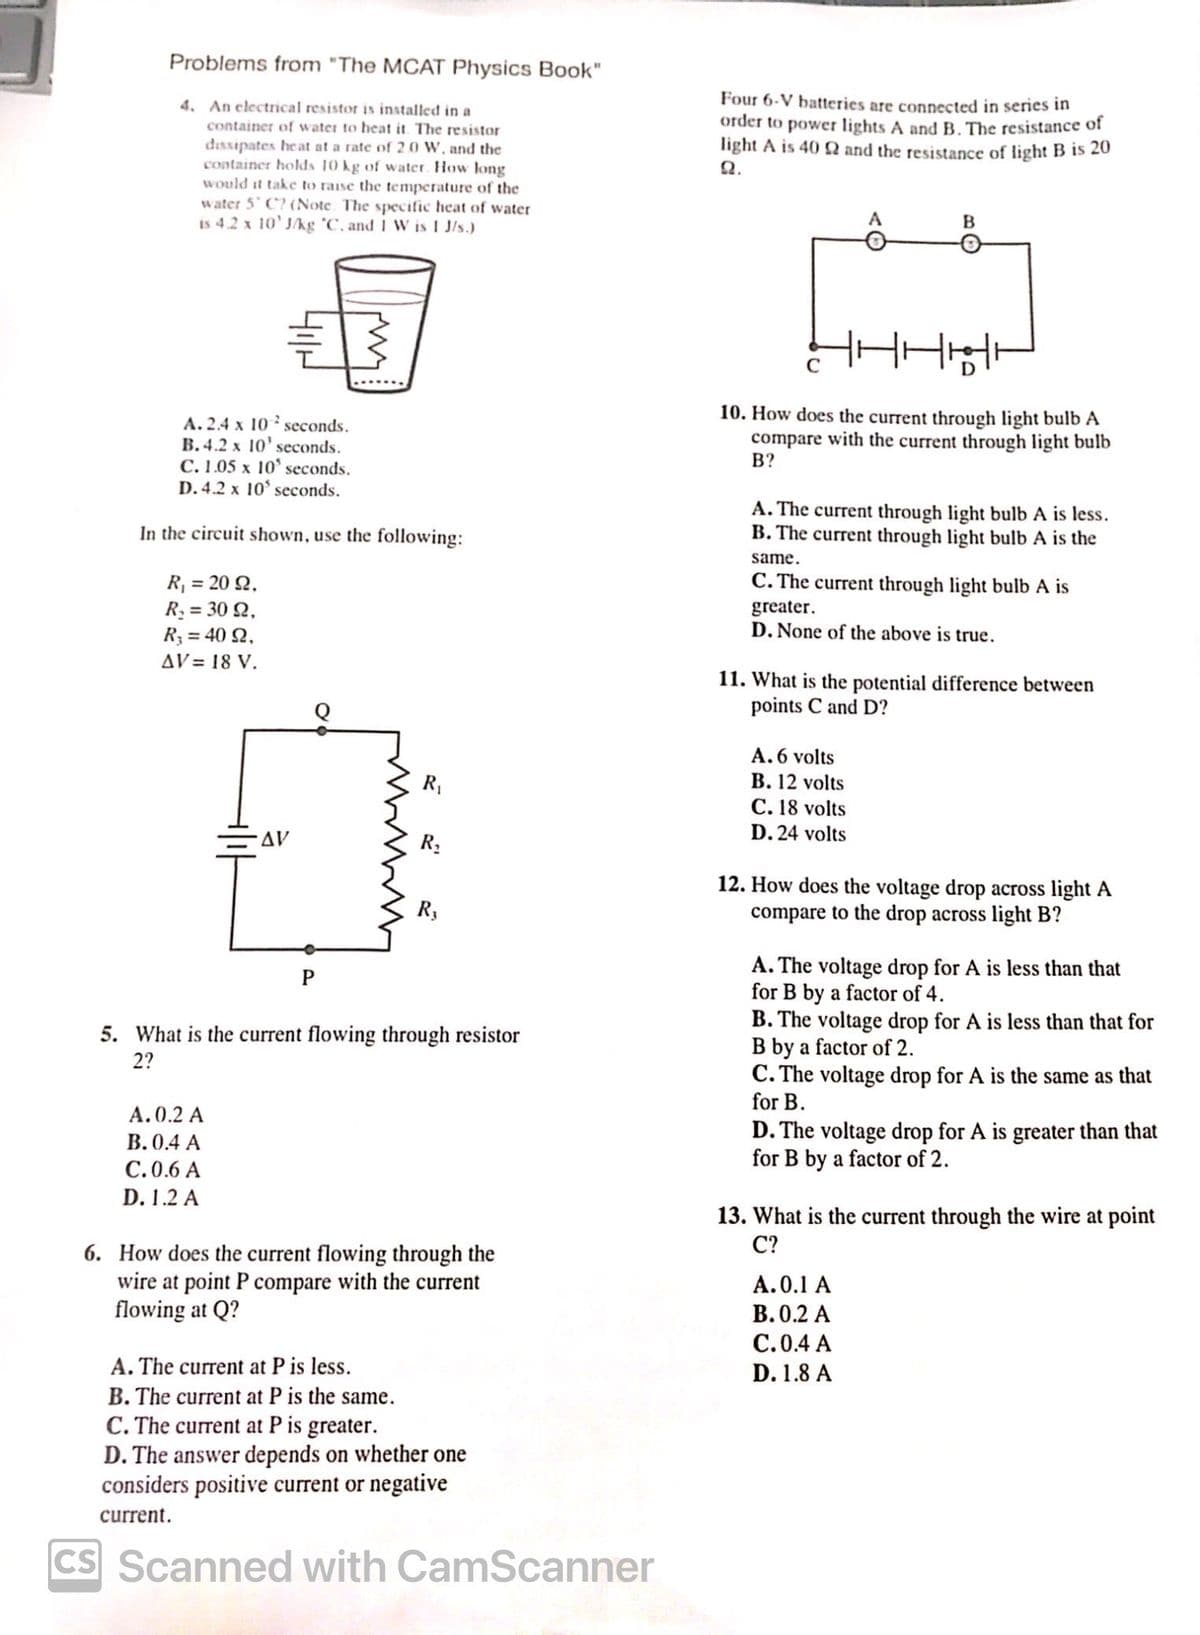 Problems from "The MCAT Physics Book"
4. An electrical resistor is installed in a
container of water to heat it. The resistor
dissipates heat at a rate of 2.0 W, and the
container holds 10 kg of water. How long
would it take to raise the temperature of the
water 5 C? (Note. The specific heat of water
is 4.2 x 10' J/kg 'C, and I W is 1 J/s.)
Four 6-V batteries are connected in series in
order to power lights A and B. The resistance of
light A is 40 and the resistance of light B is 20
Ω.
A
B
A.2.4 x 10 seconds.
B.4.2 x 10' seconds.
C. 1.05 x 10' seconds.
D. 4.2 x 10' seconds.
In the circuit shown, use the following:
R₁ = 20 2,
R₁ = 30 2,
R₁ = 40 2,
AV= 18 V.
10. How does the current through light bulb A
compare with the current through light bulb
B?
A. The current through light bulb A is less.
B. The current through light bulb A is the
same.
C. The current through light bulb A is
greater.
D. None of the above is true.
11. What is the potential difference between
points C and D?
A. 6 volts
C. 18 volts
D. 24 volts
B. 12 volts
R₁
AV
R₁
R3
P
5. What is the current flowing through resistor
2?
A.0.2 A
B. 0.4 A
C.0.6 A
D. 1.2 A
6. How does the current flowing through the
wire at point P compare with the current
flowing at Q?
A. The current at P is less.
B. The current at P is the same.
C.The current at P is greater.
D. The answer depends on whether one
considers positive current or negative
current.
CS Scanned with CamScanner
12. How does the voltage drop across light A
compare to the drop across light B?
A. The voltage drop for A is less than that
for B by a factor of 4.
B. The voltage drop for A is less than that for
B by a factor of 2.
C. The voltage drop for A is the same as that
for B.
D. The voltage drop for A is greater than that
for B by a factor of 2.
13. What is the current through the wire at point
C?
A.0.1 A
B. 0.2 A
C.0.4 A
D. 1.8 A